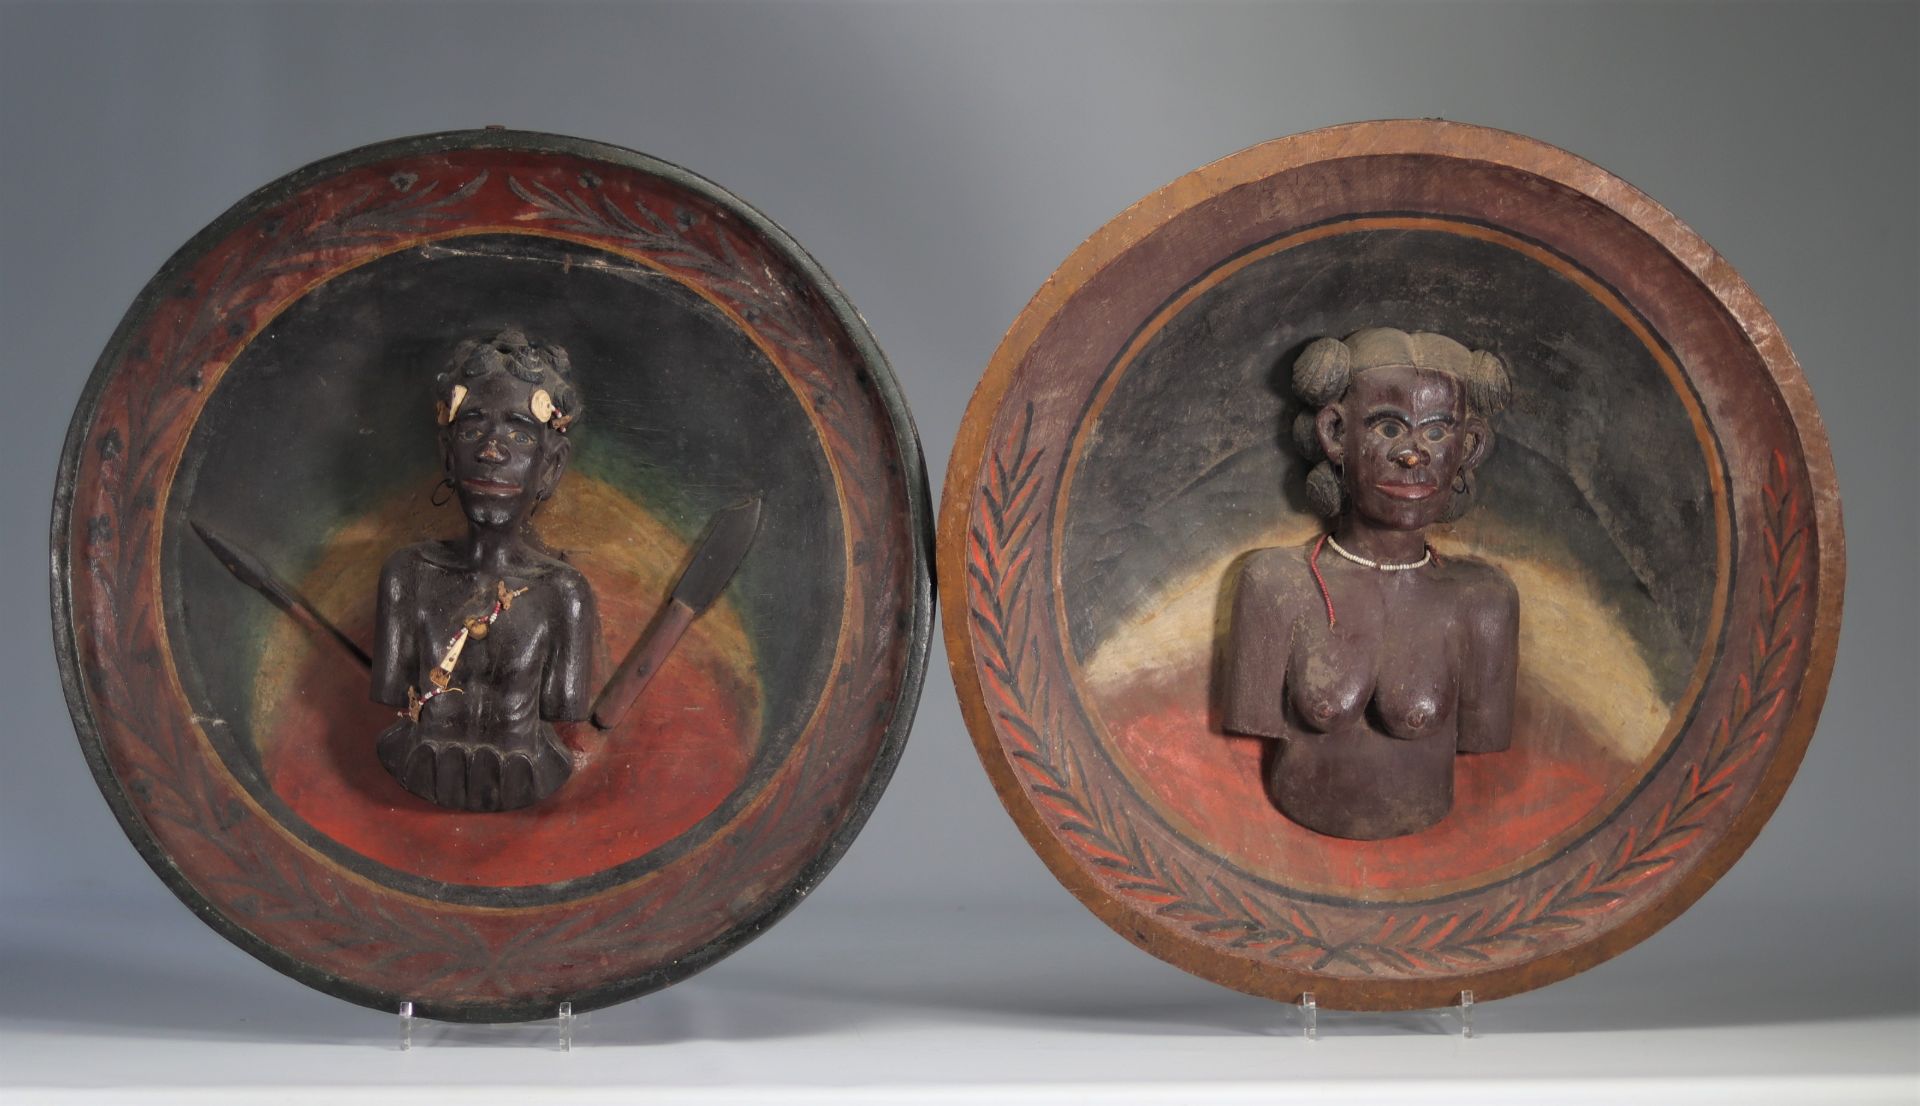 Pair of carved panels colonial period Madagascar. Ex coll J.Y. COUE - inscription on the back